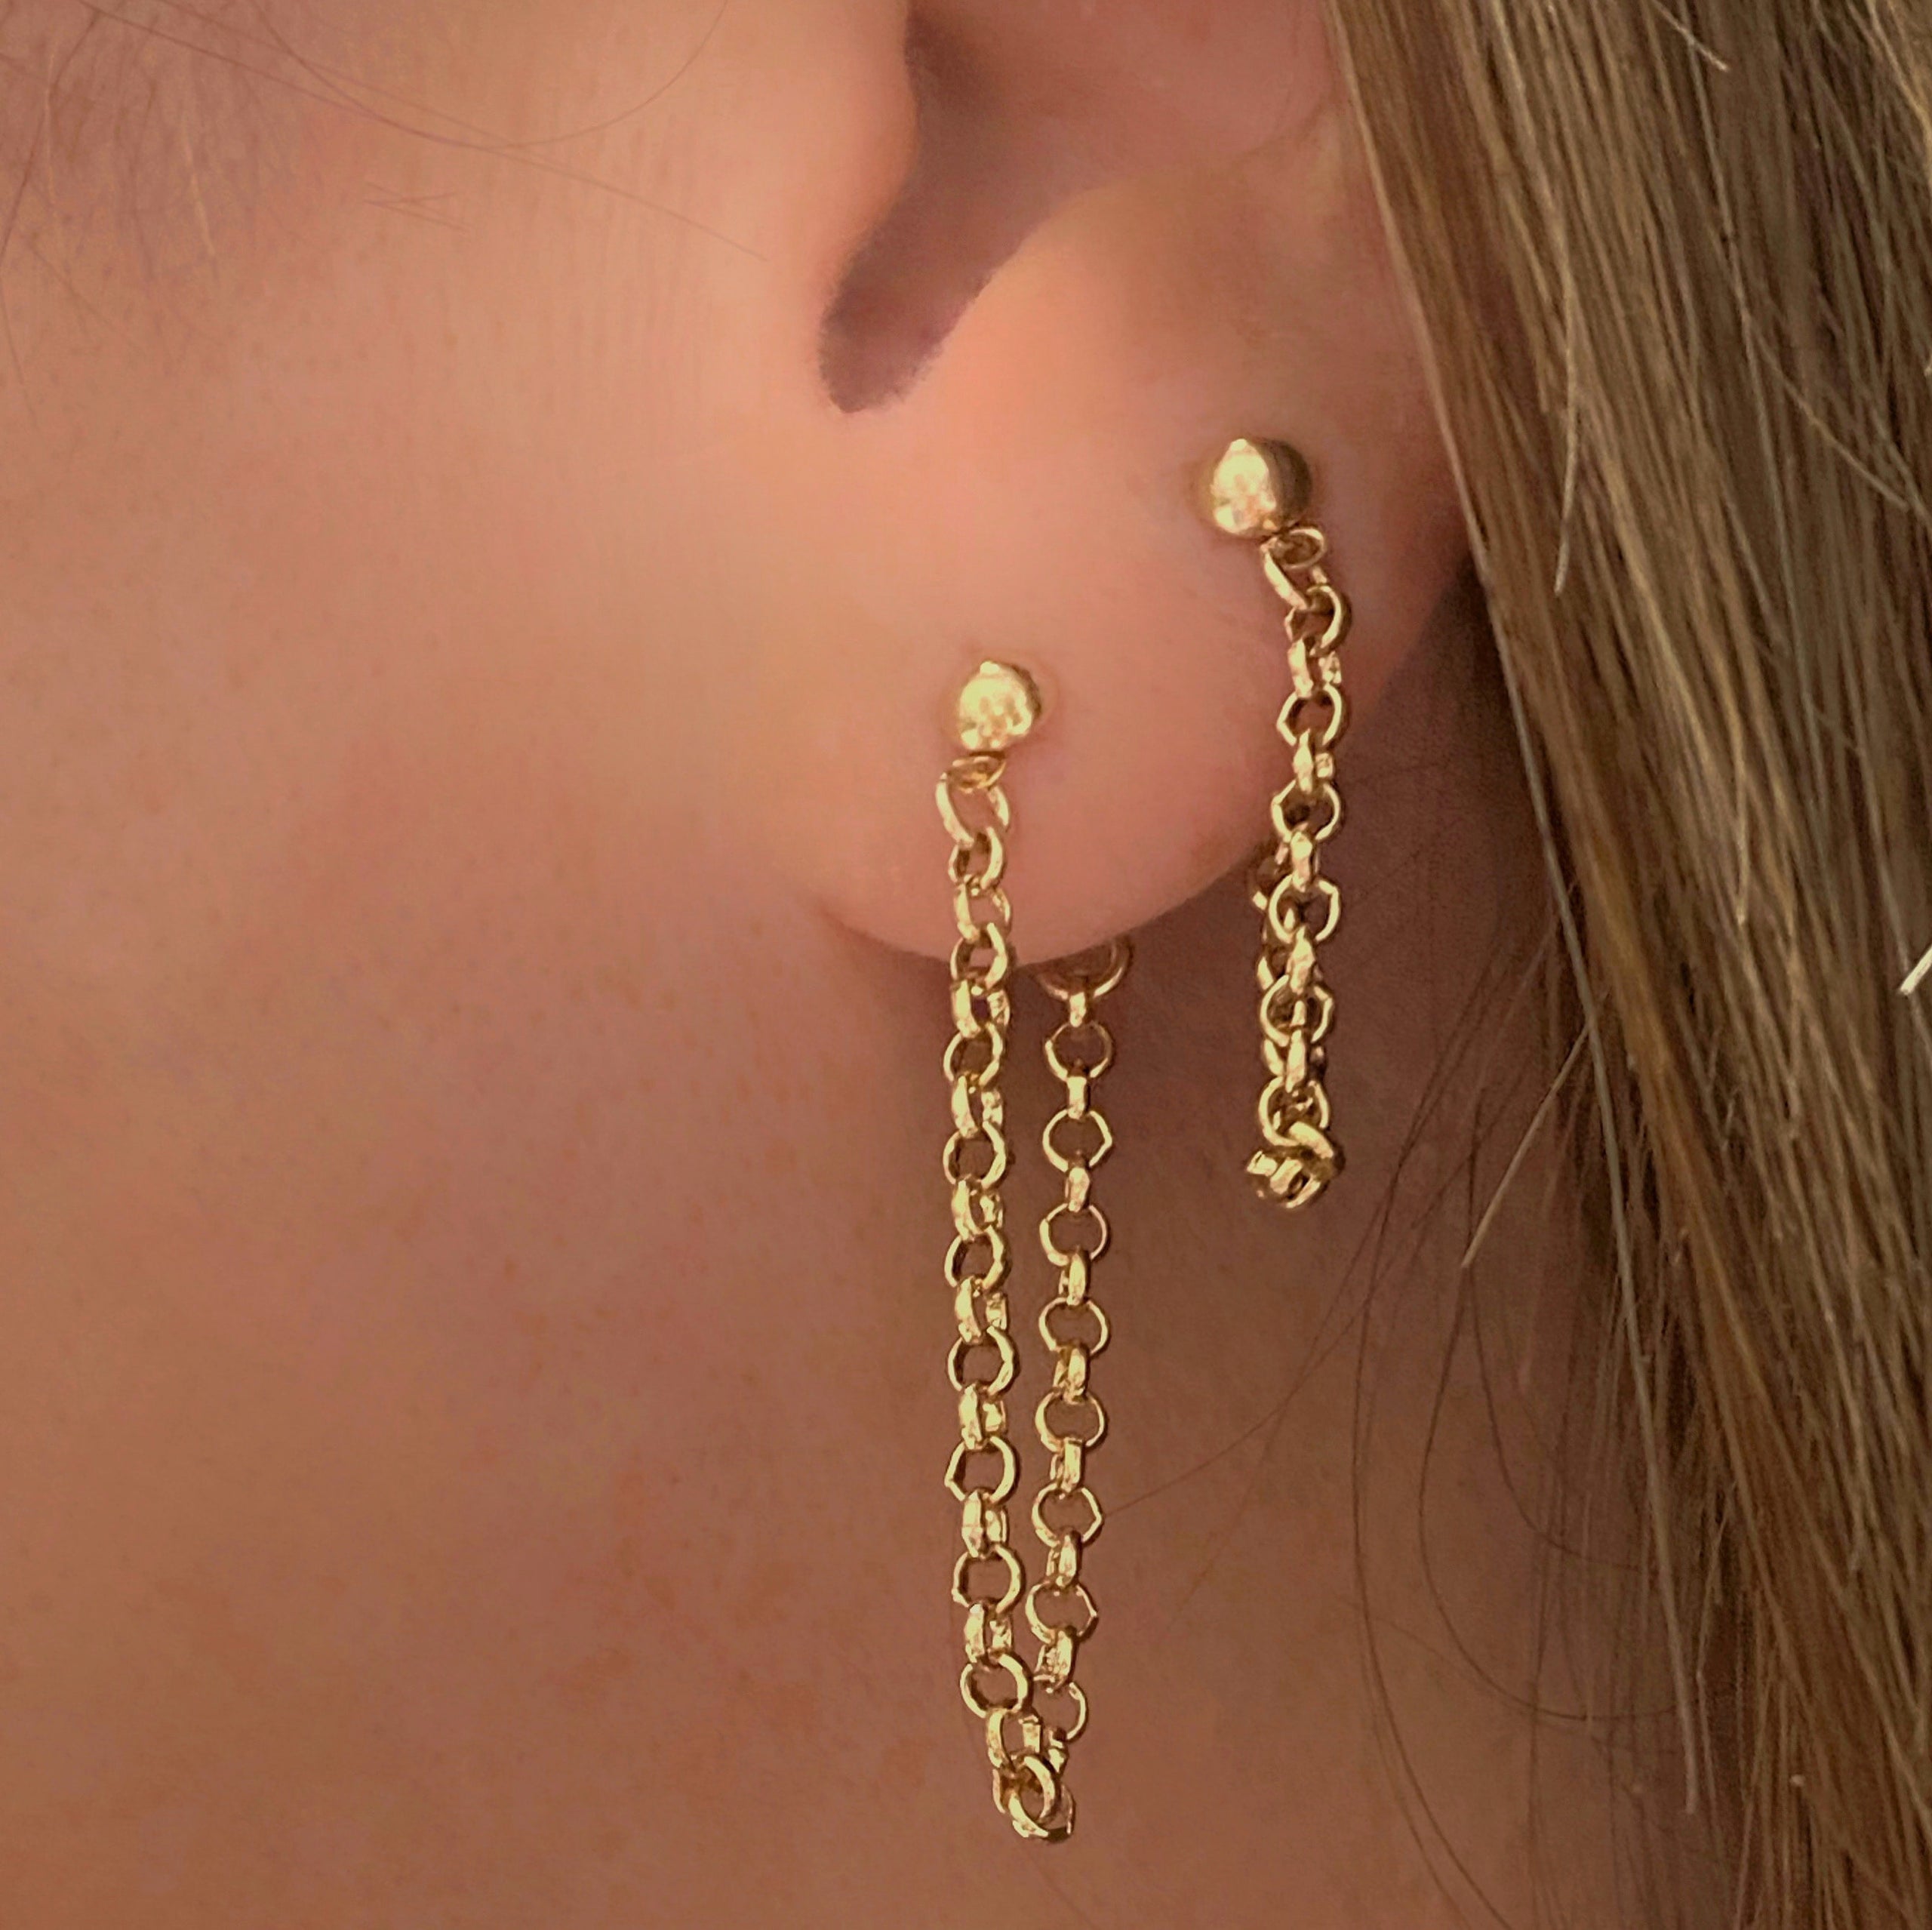 Mini Hoop Earrings  Grain of Sand by Aneth Handcrafted Jewelry